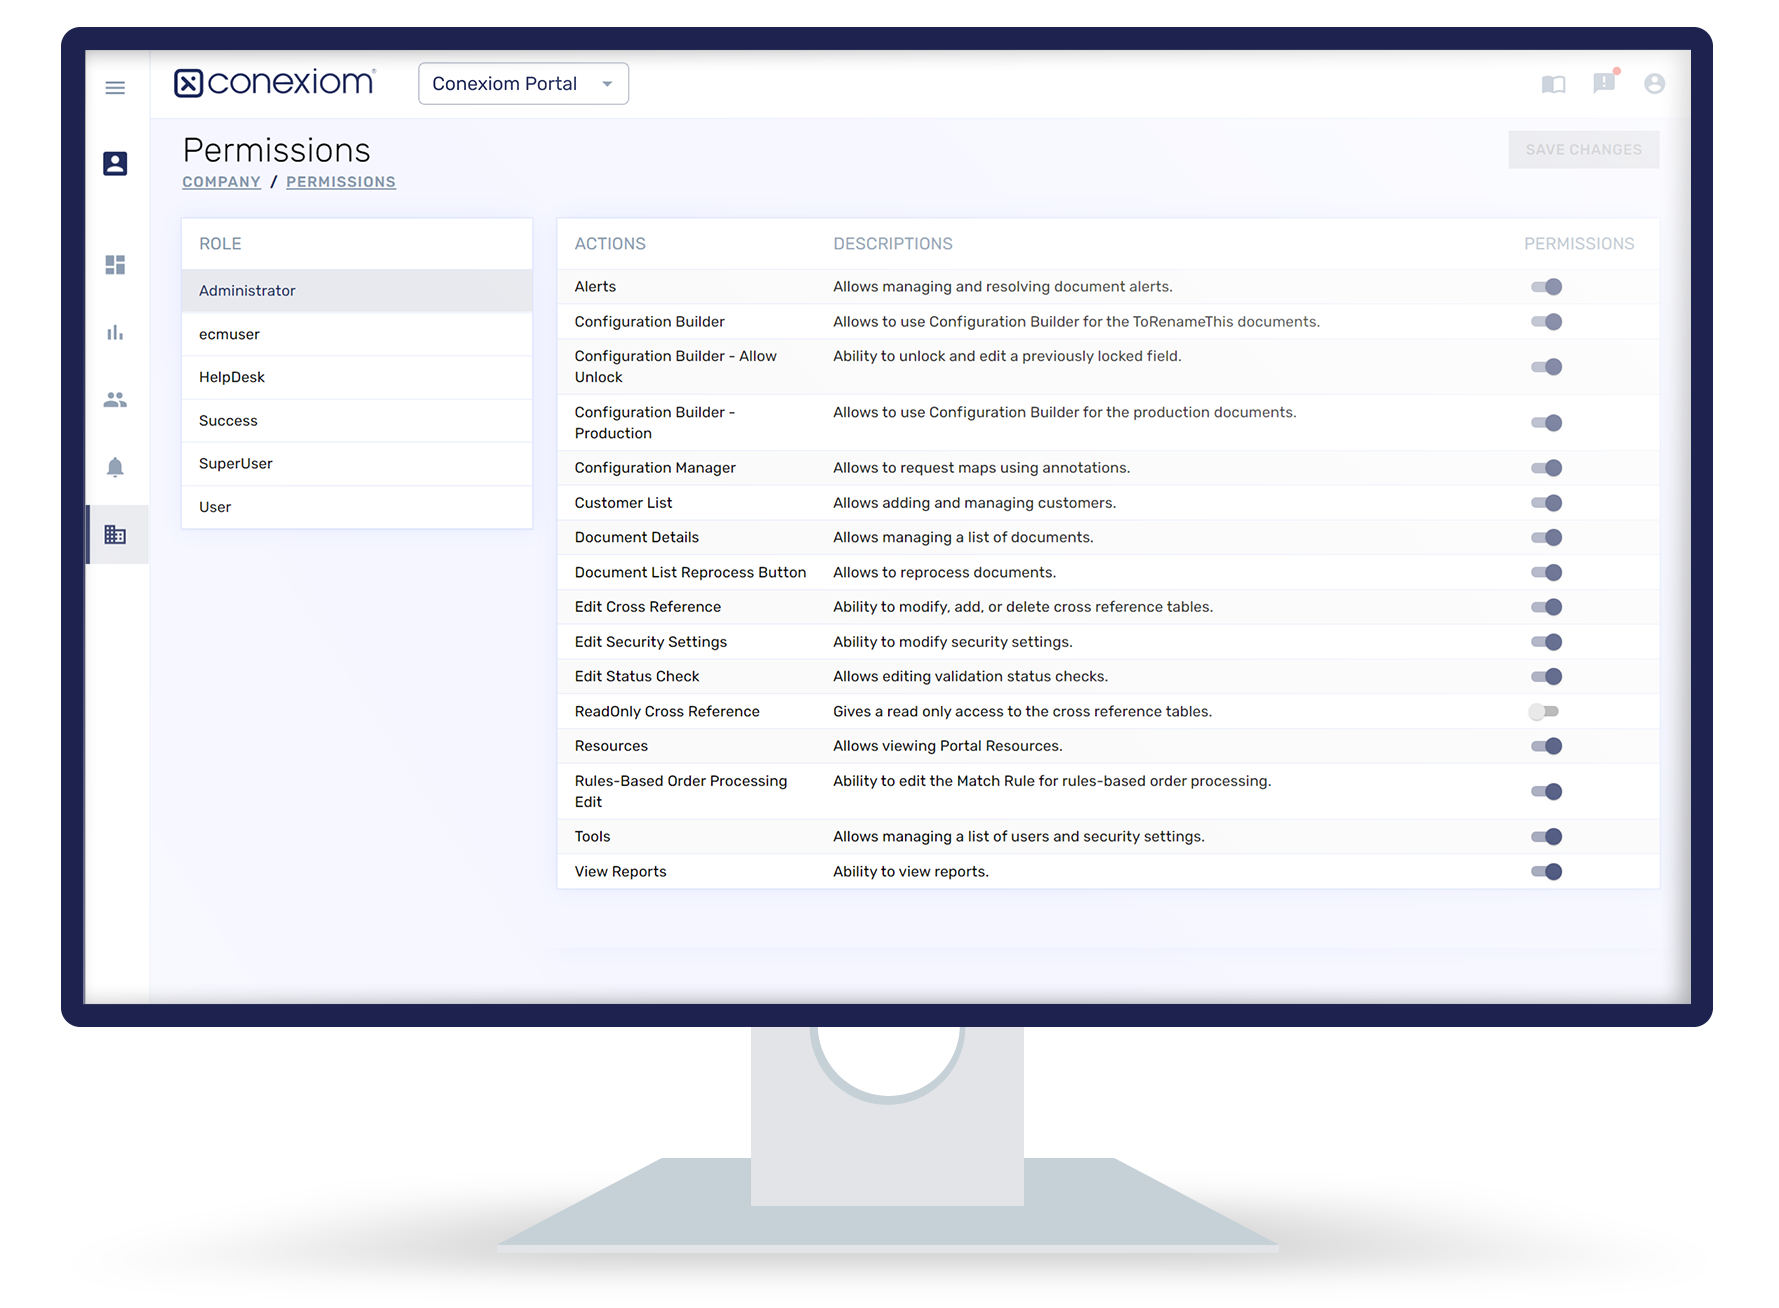 Admin Tools - Manage users and settings within The Conexiom Platform with available Admin Tools.